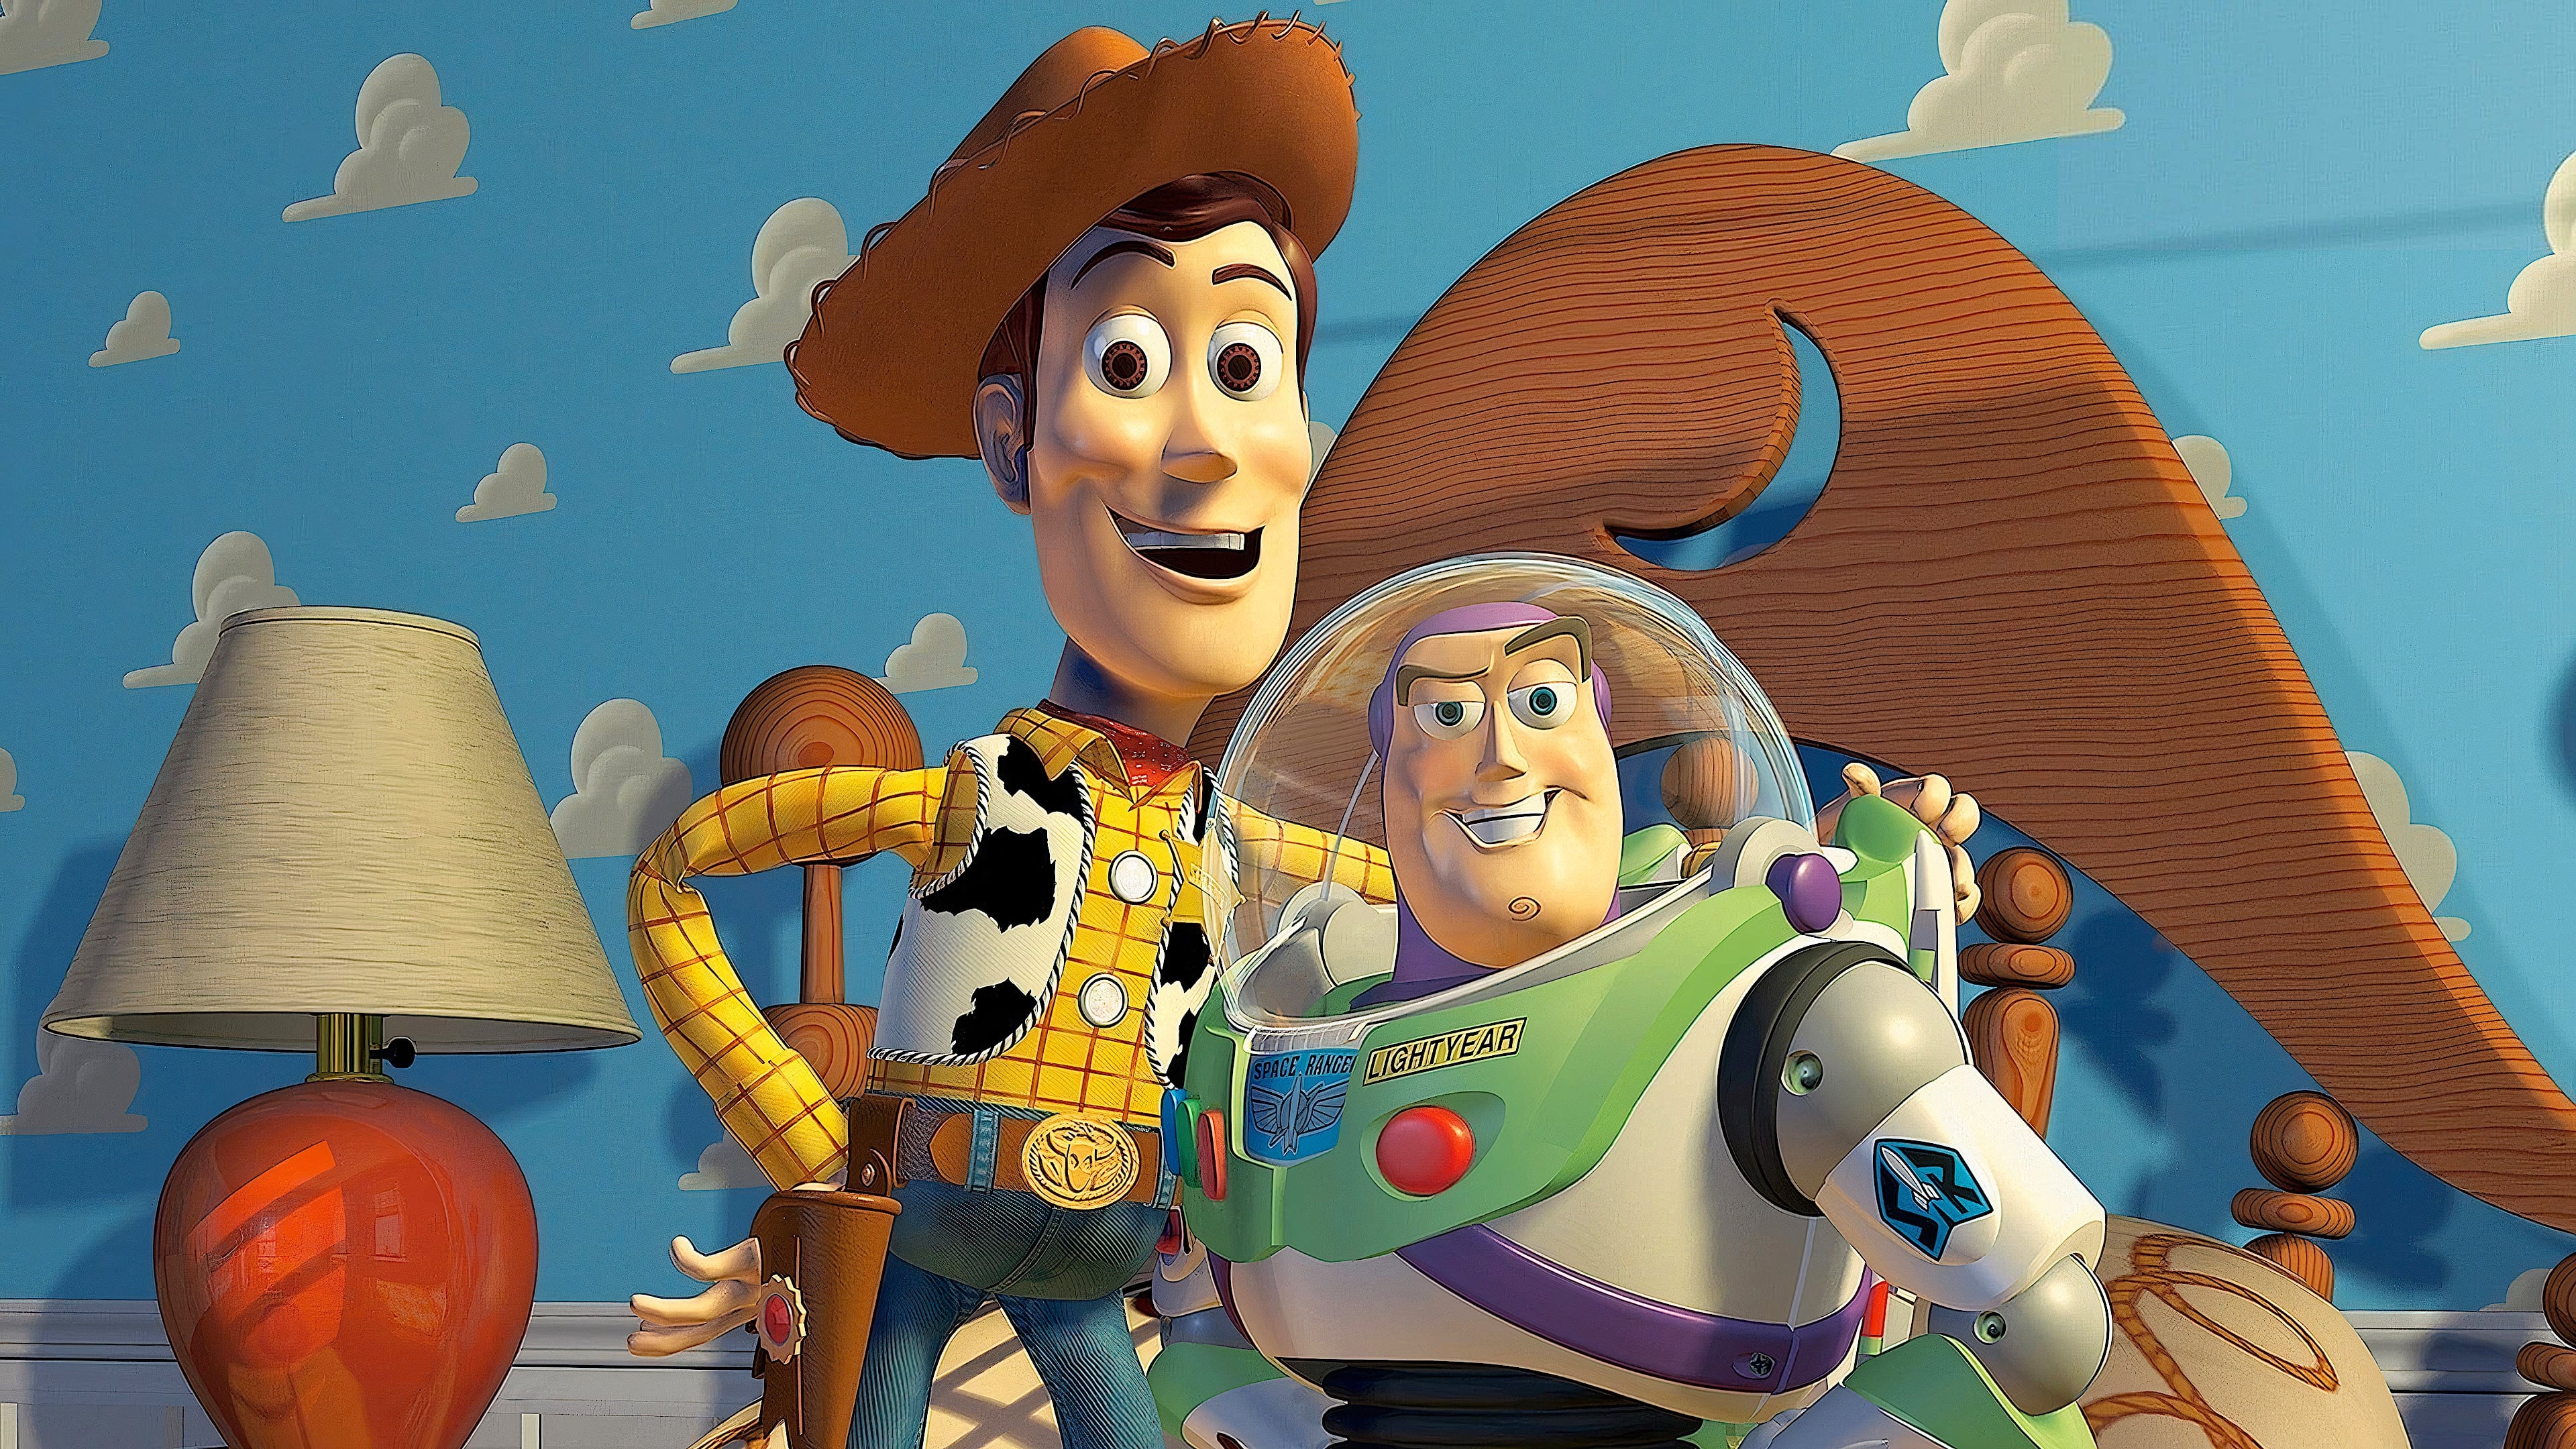 The Story Behind 'Toy Story' (1996)